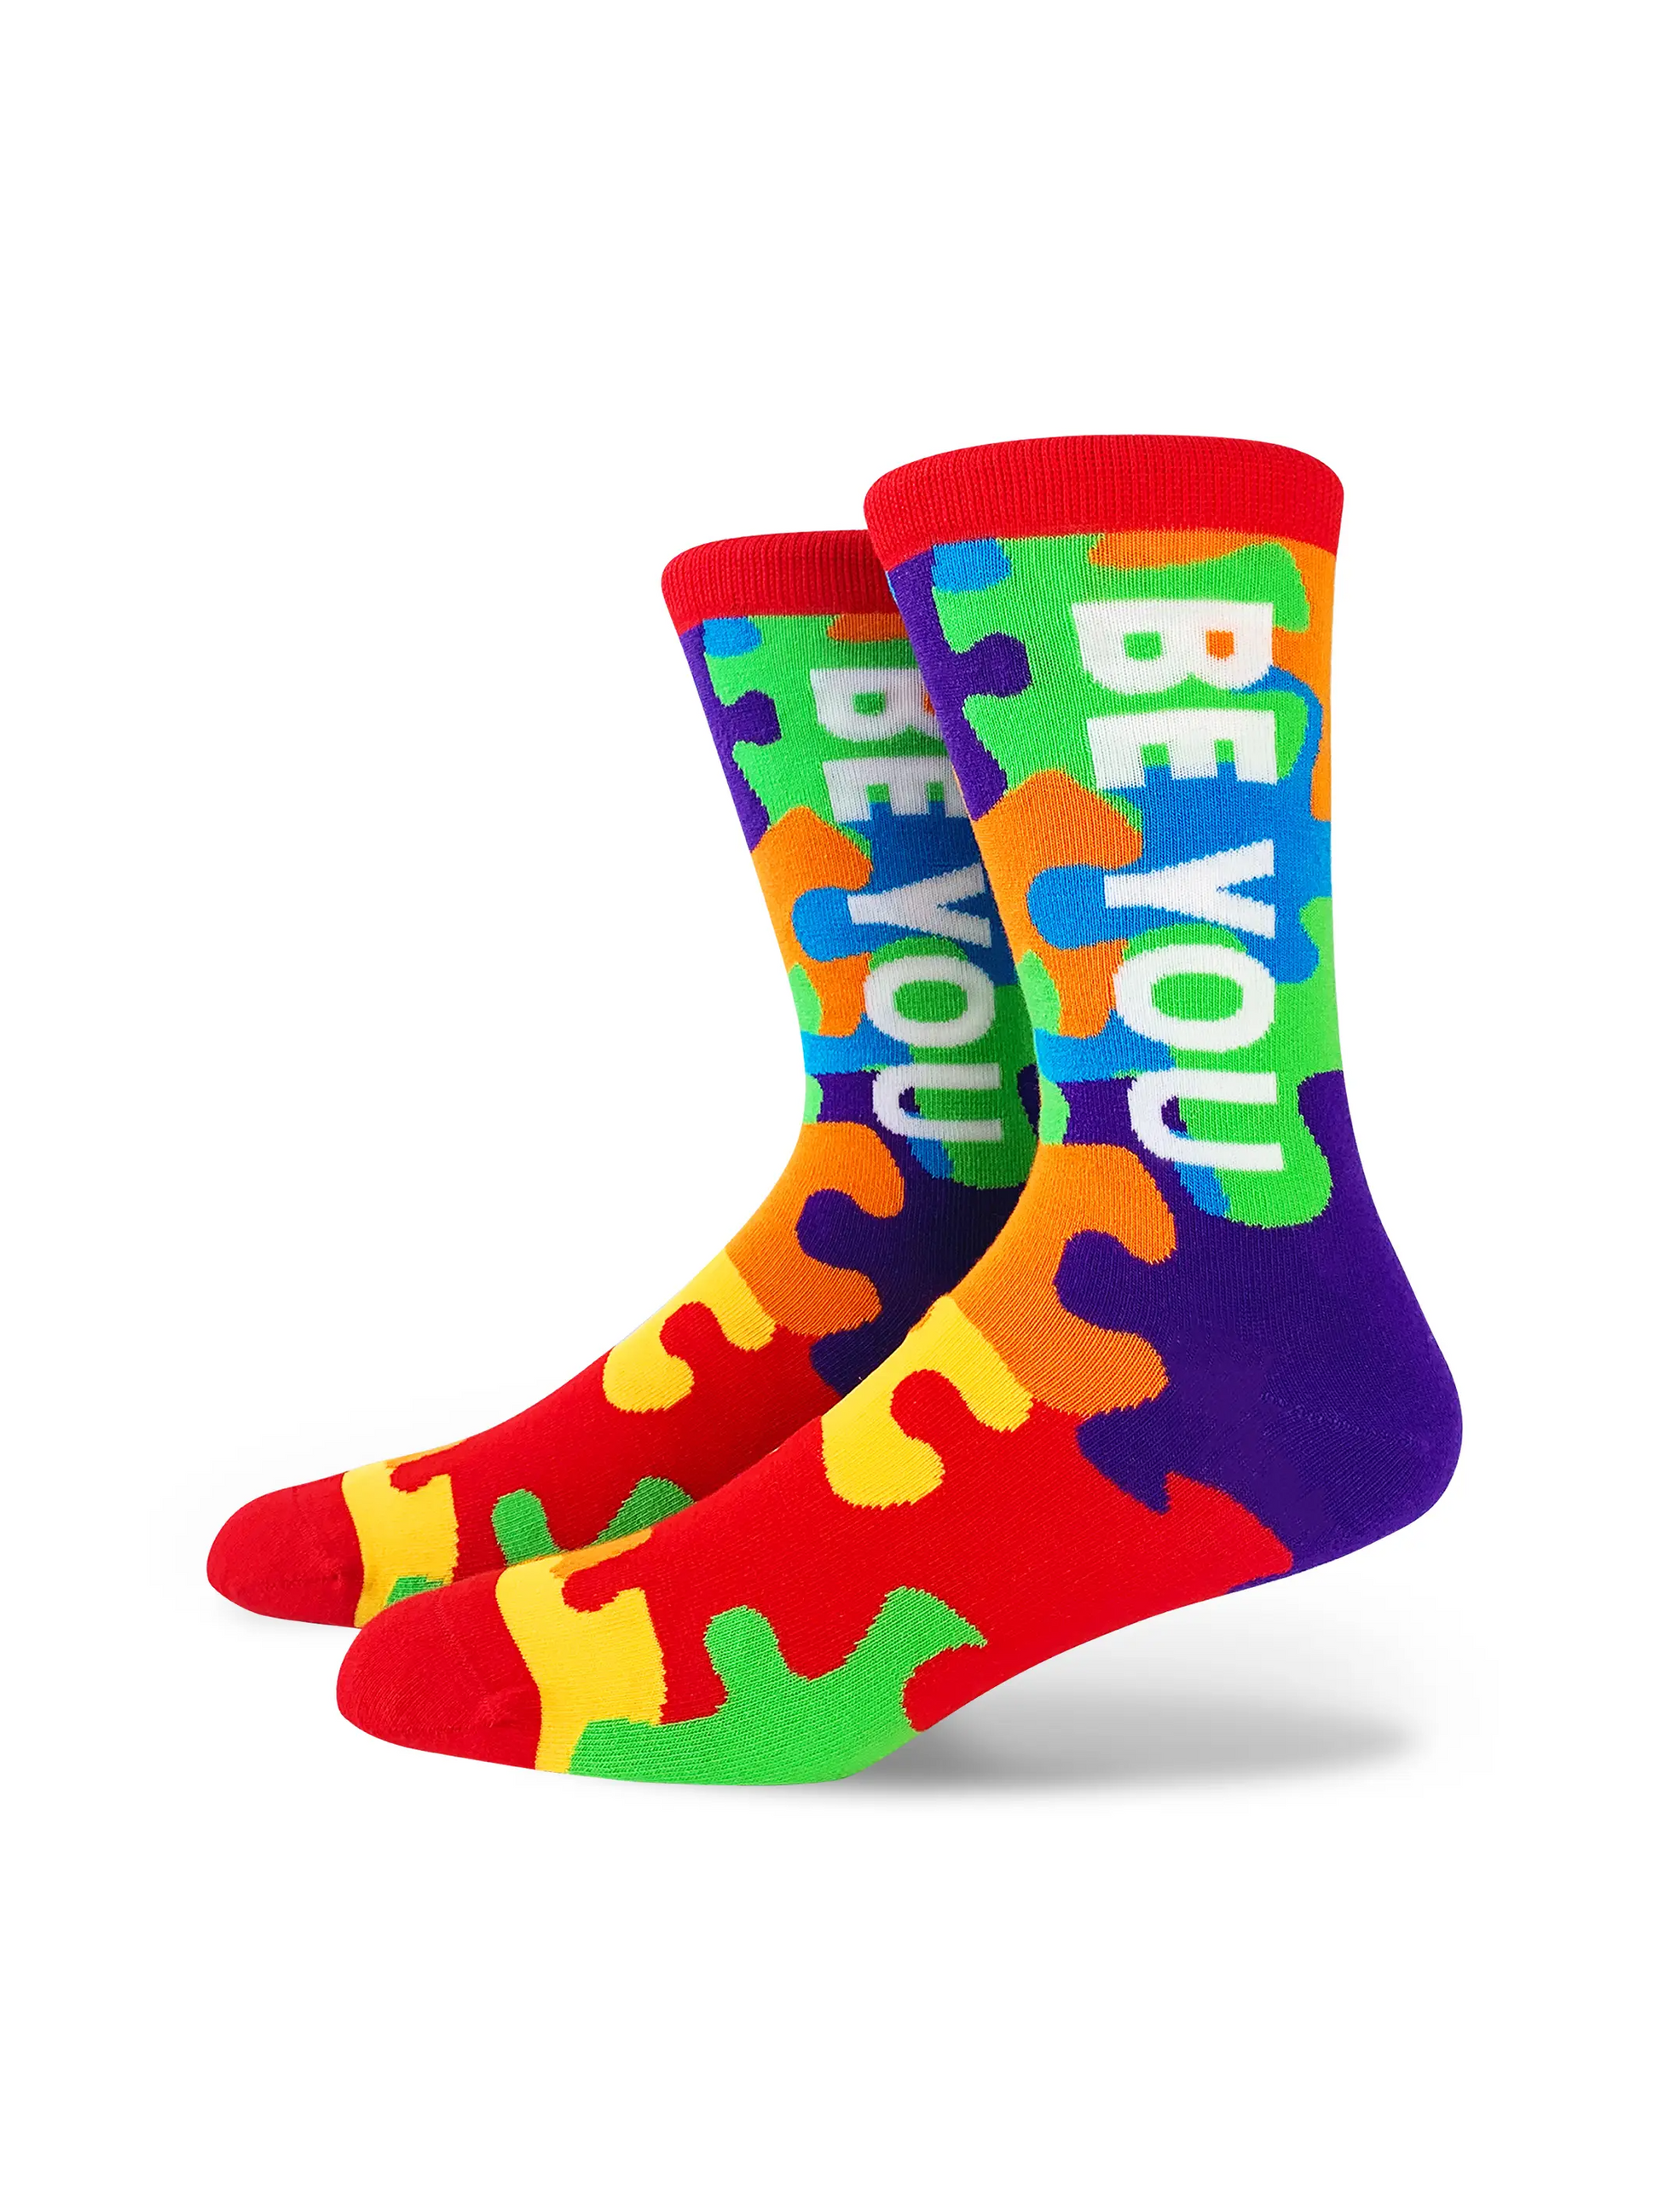 Colorful rainbow puzzle piece socks with text "Be You" - Mellow Monkey